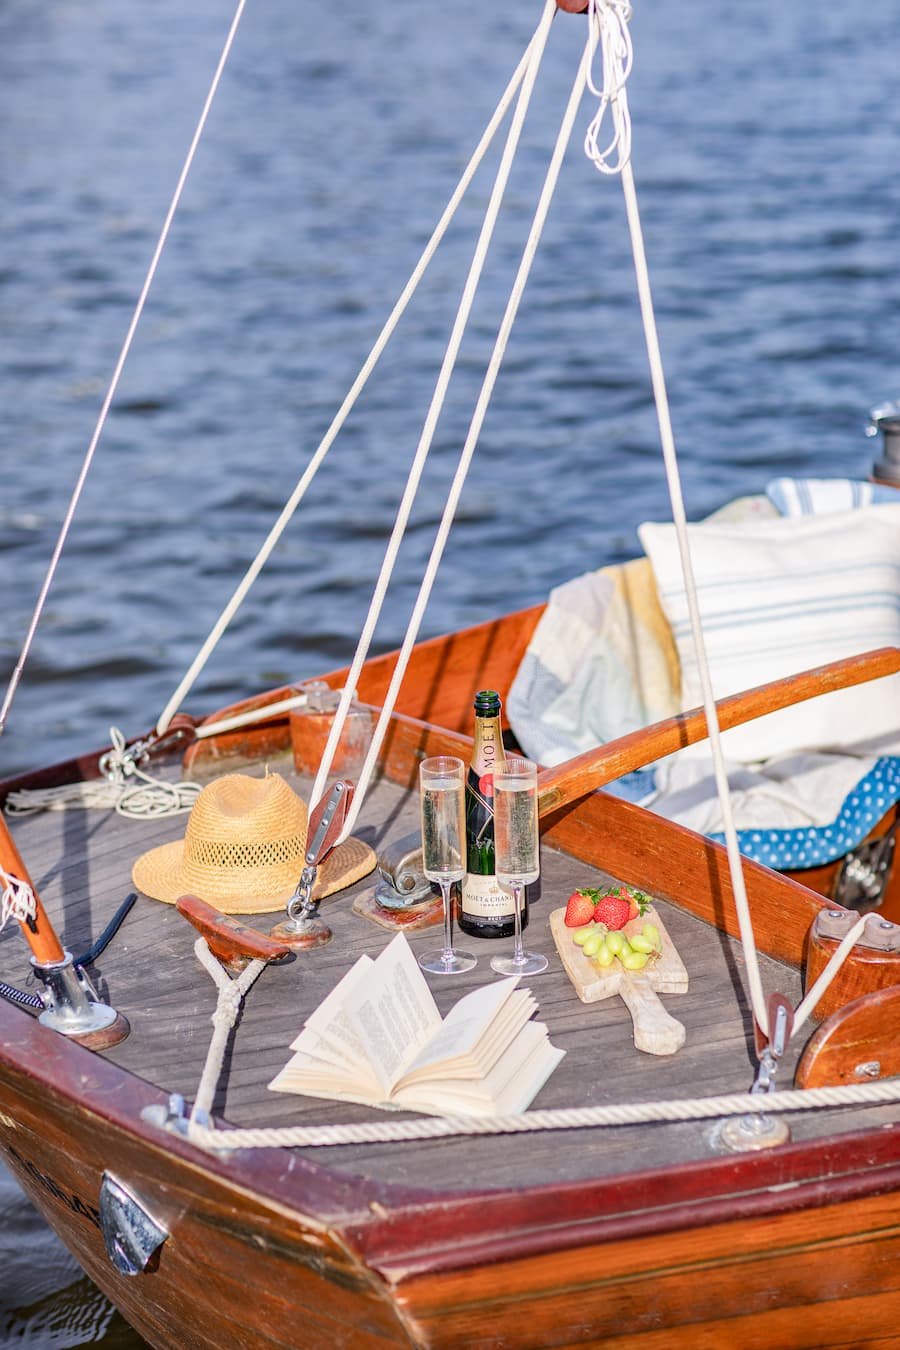 Styled shot at the front of a sail boat consisting of a straw hat, champagne flutes, an open book and a wooden board with grapes and strawberries The sun is glowing perfectly providing the all important golden glow